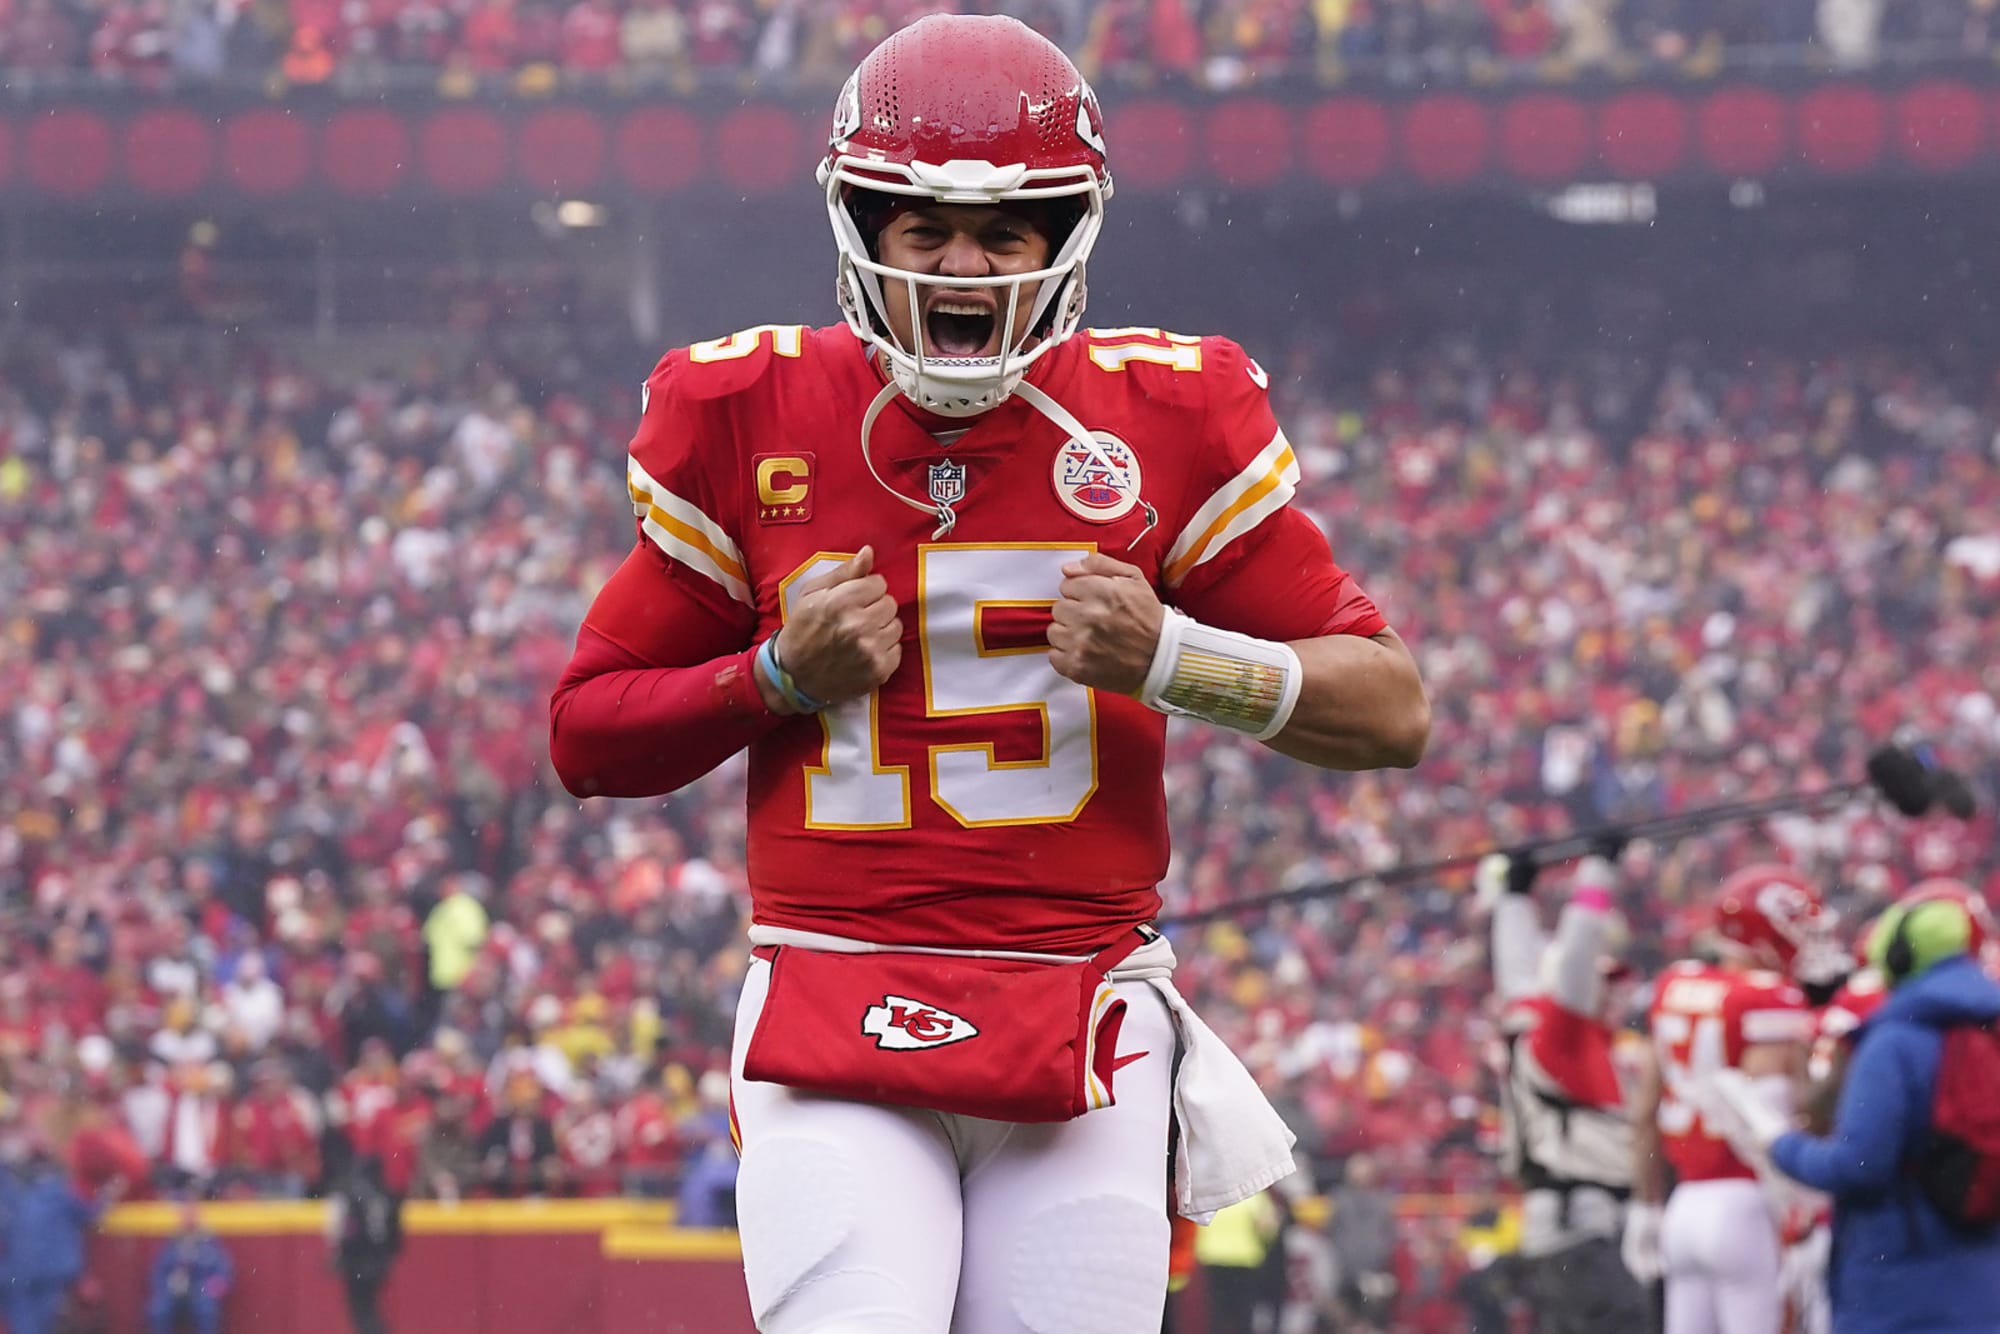 Patrick Mahomes injury update: Chiefs QB has great news, as do all his friends